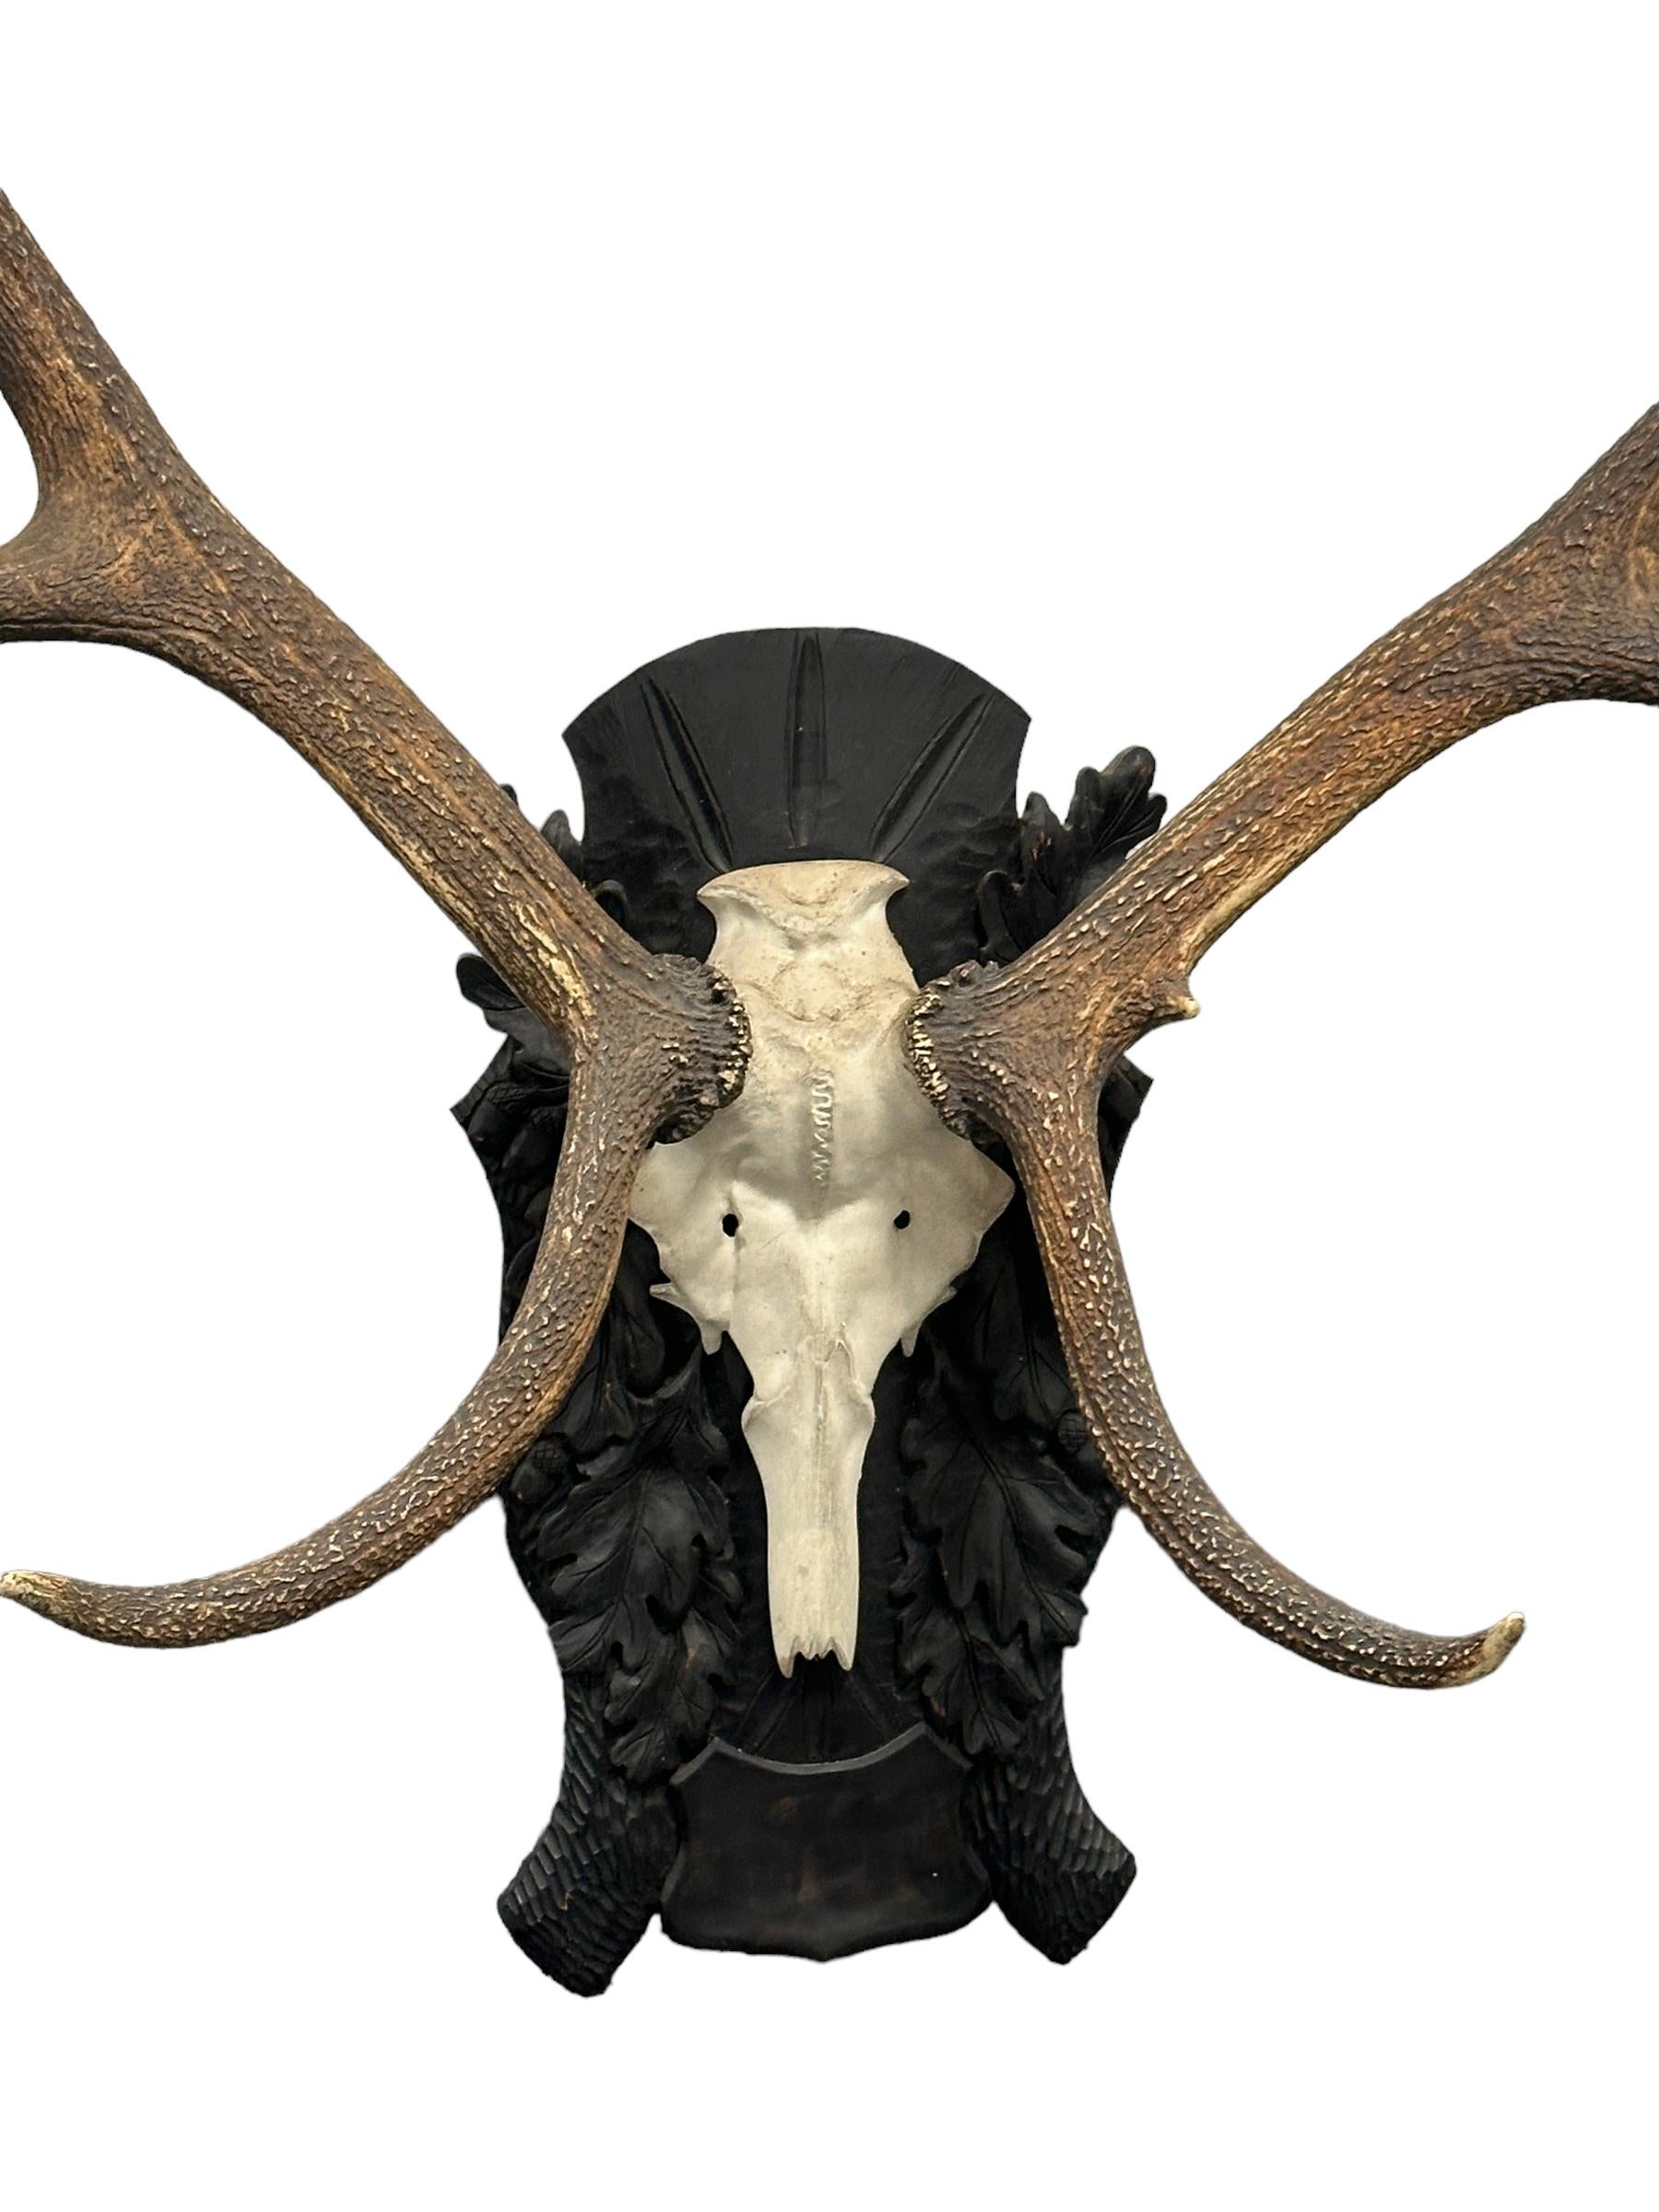 Here I have to offer a  pair of stunning large deer antlers on a metal skull. This unit is attached to a wood-carved Black Forest plaque. The trophy is sent dismantled to keep the shipping costs tolerable. It can be easily screwed together. This